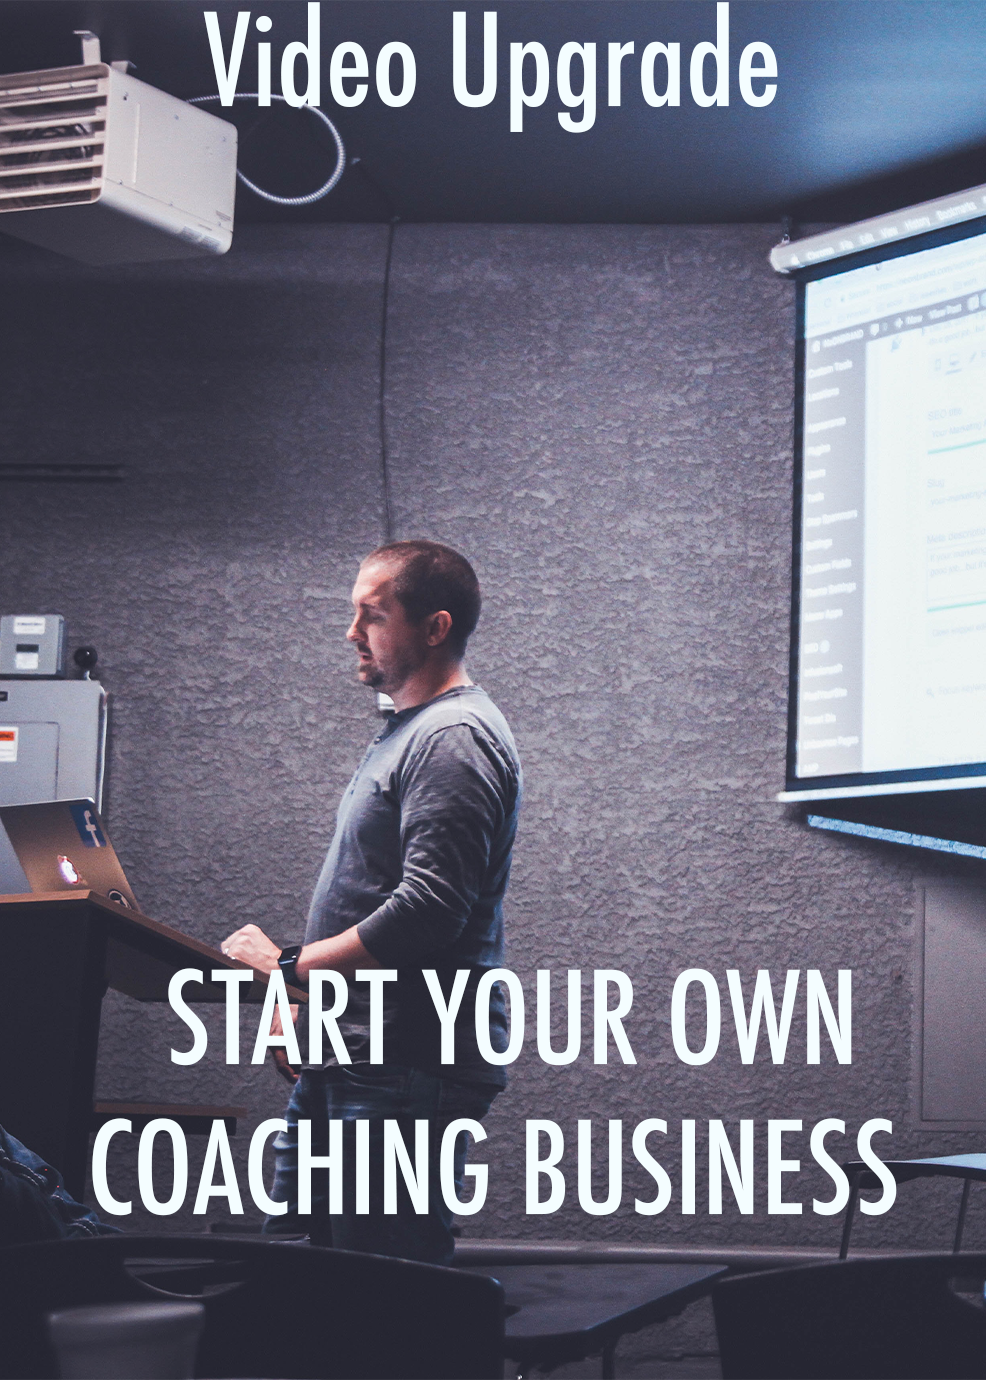 Start Your Own Coaching Business Video Upgrade